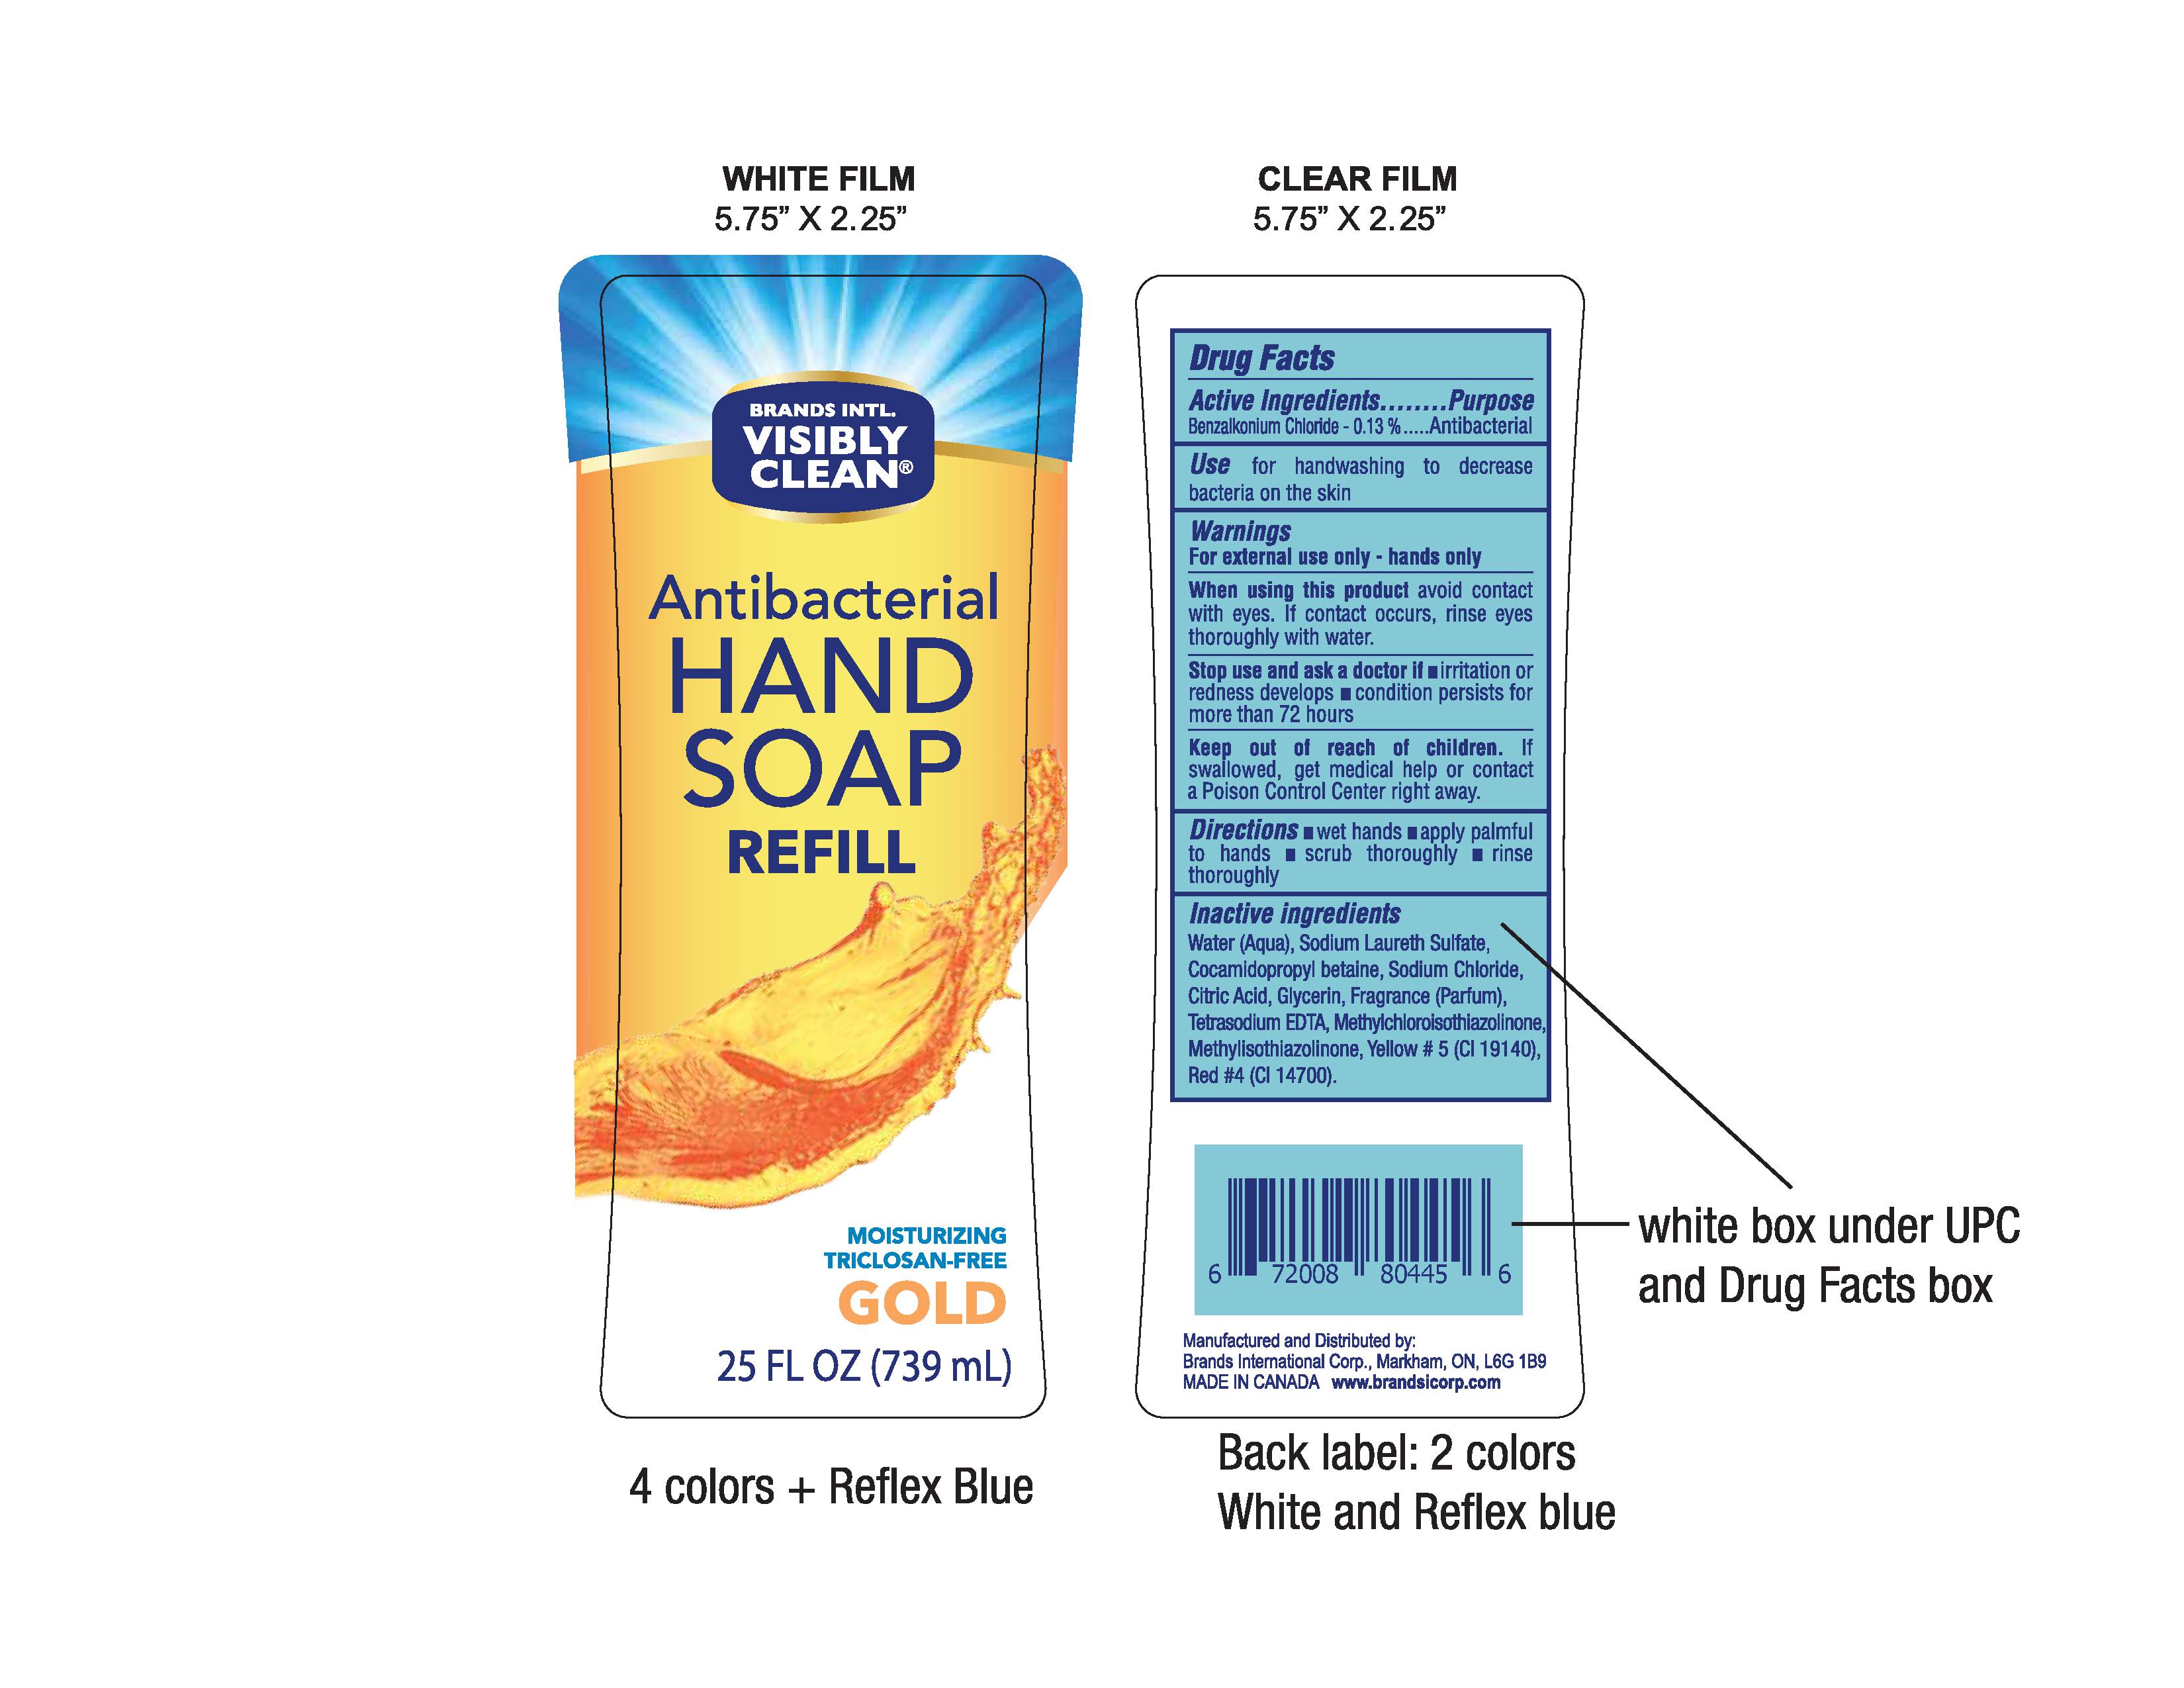 Visibly Clean Antibacterial Hand Soap